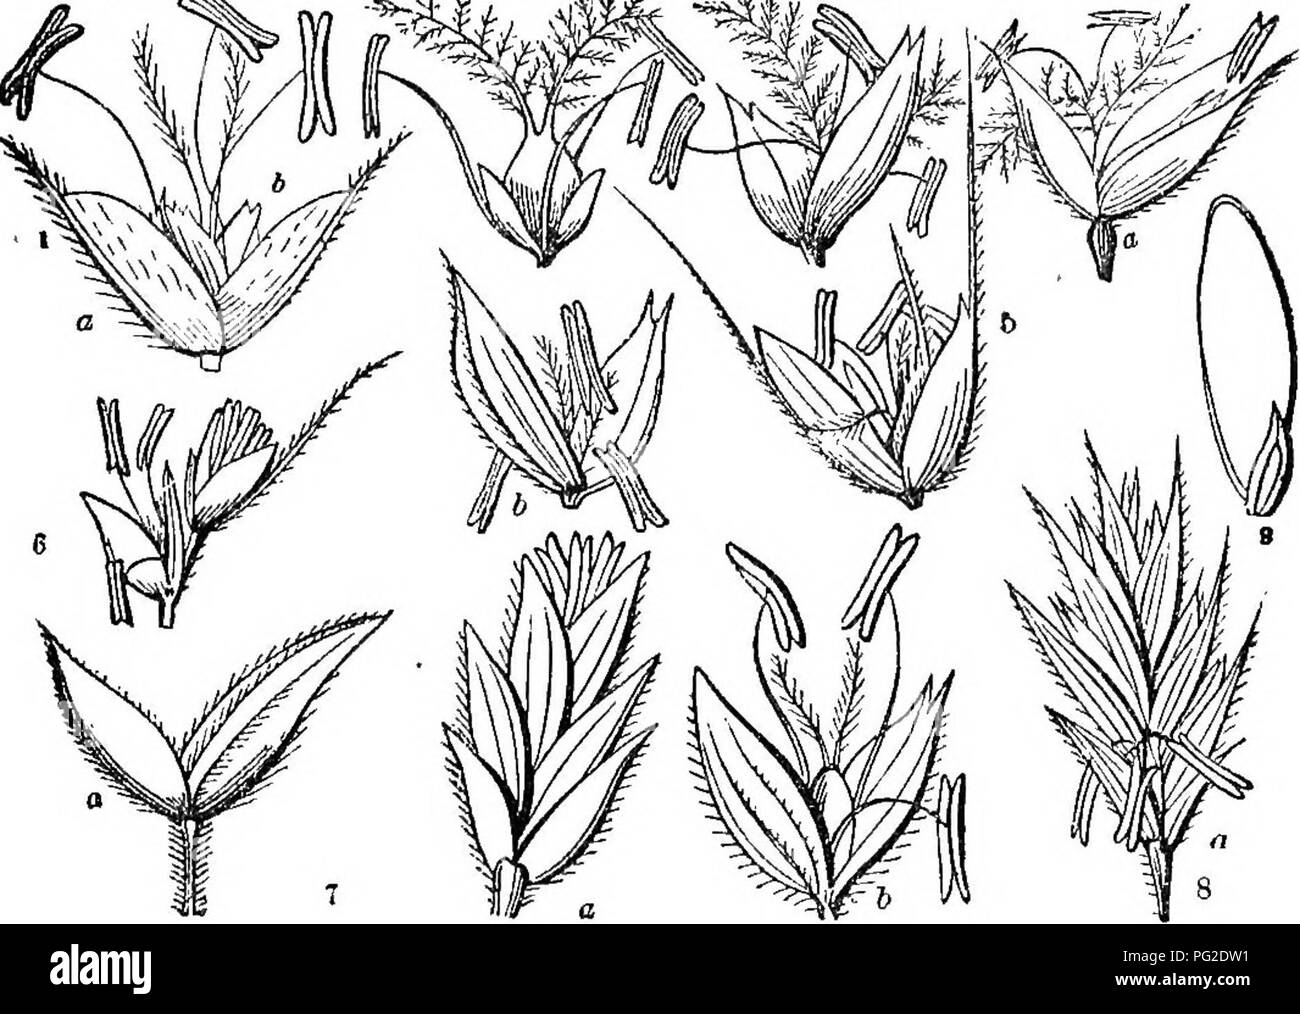 . Class-book of botany : being outlines of the structure, physiology, and classification of plants ; with a flora of the United States and Canada . Botany; Botany; Botany. 110 OaBBR 166.âGRAMINE^i; Order CLVI. GRAMINE^. Grasses. Herbs, rarely woody or arborescent, with (mostly) hollow, jointed culms; with leaves alternate, distychous, on tubular sheatbs split down lo the nodes, and a li^k (stipules) of membranous texture where the leaf joins the sheath. Flowers in little spikelets of 1 or several, with glumes distychously arranged, and collected into spikes, racemes or panicles. Glumes, tho lo Stock Photo